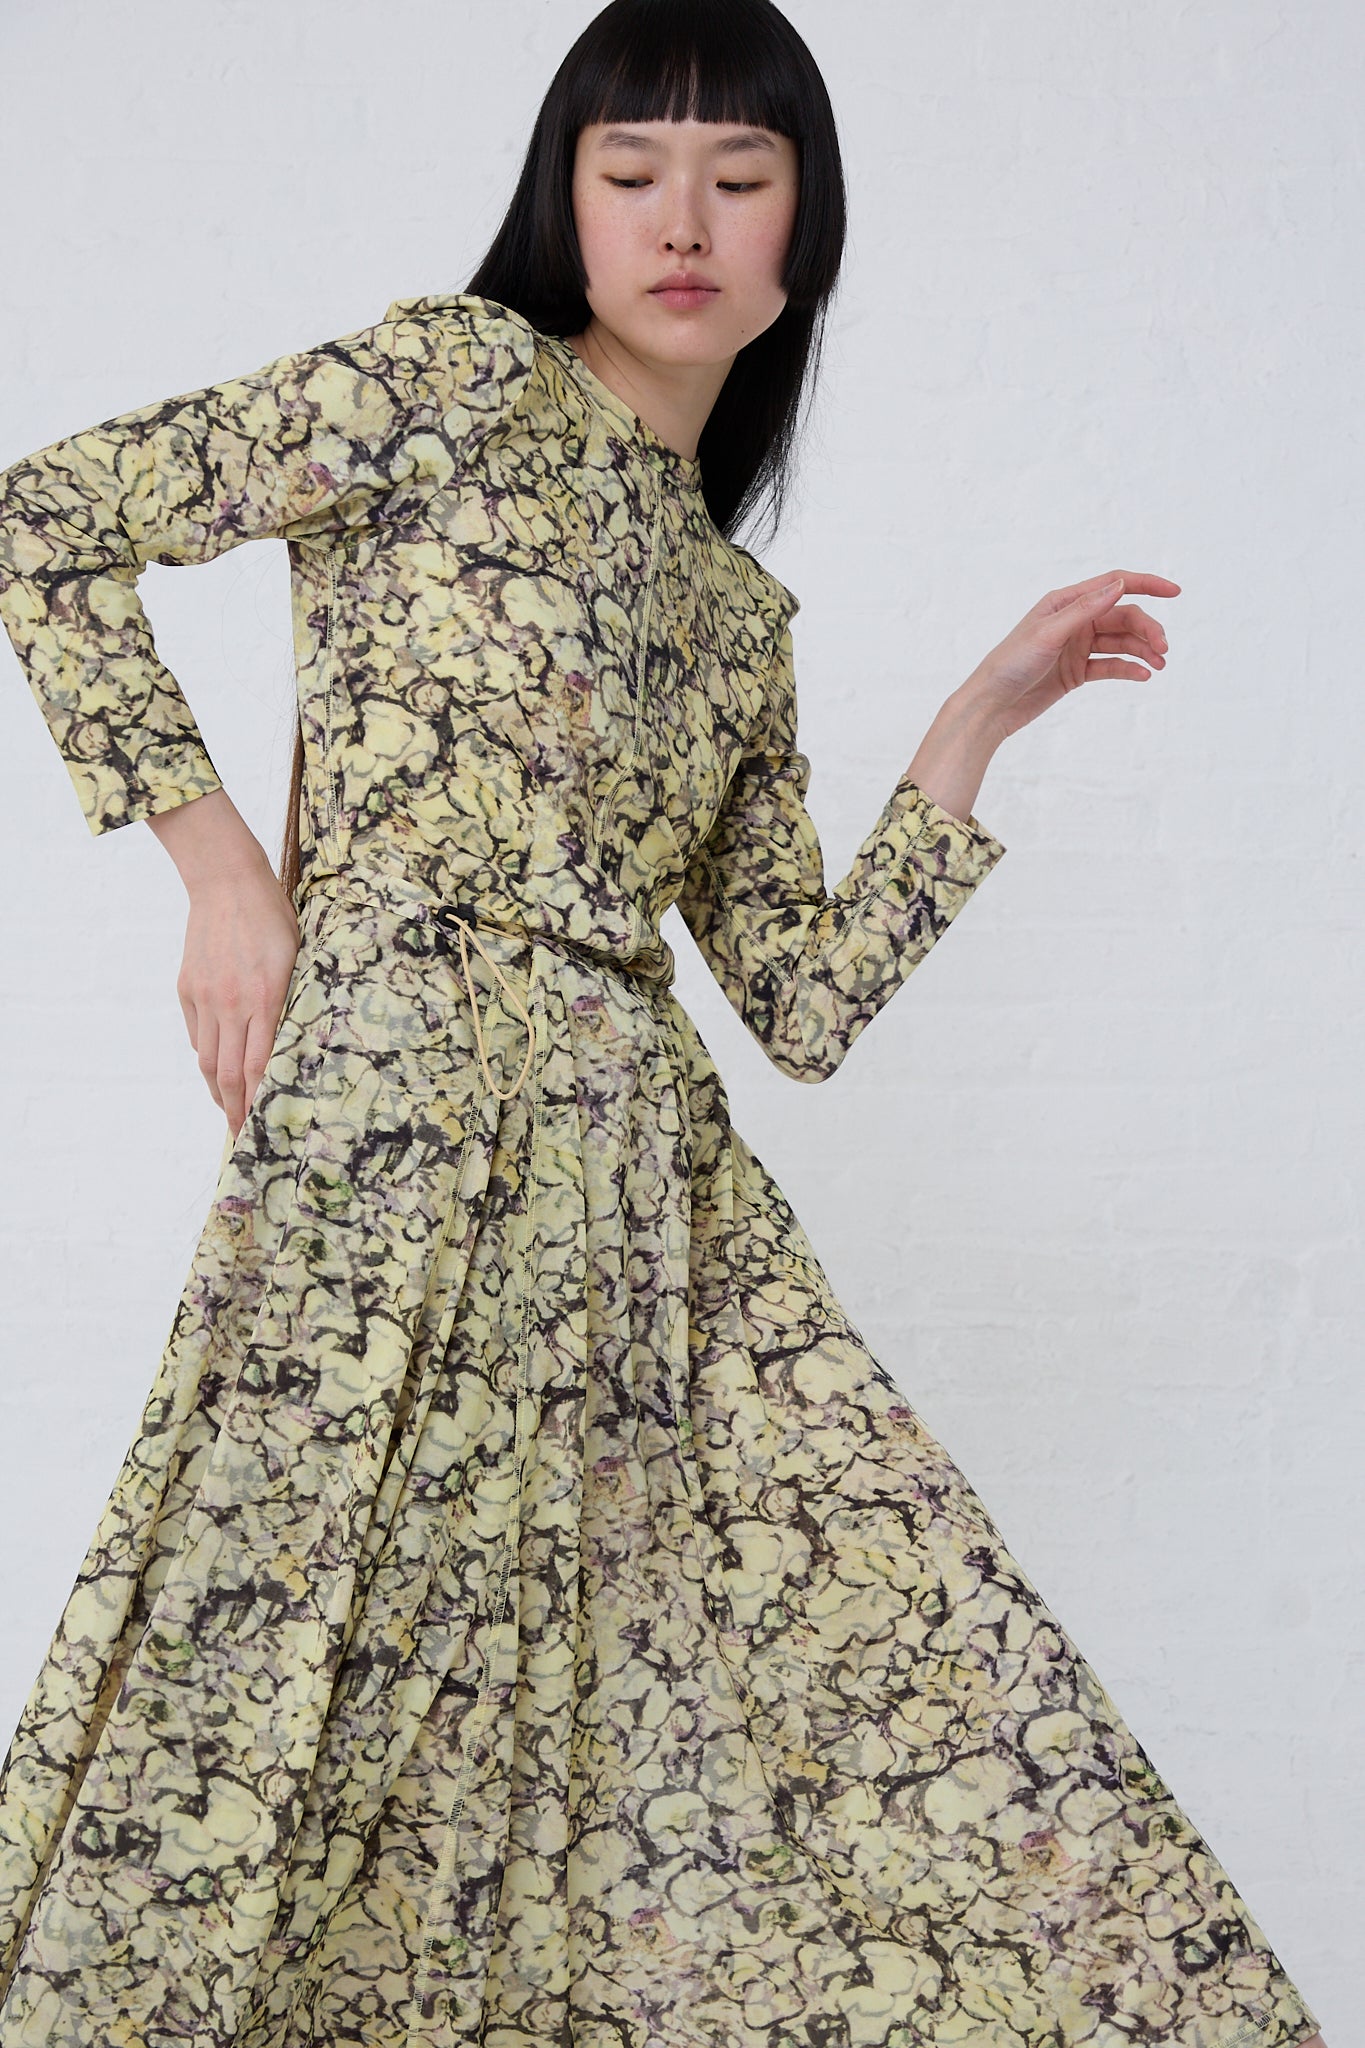 Woman in a flowing, long-sleeve TOGA ARCHIVES Tricot Print Dress in Yellow posing against a white background.